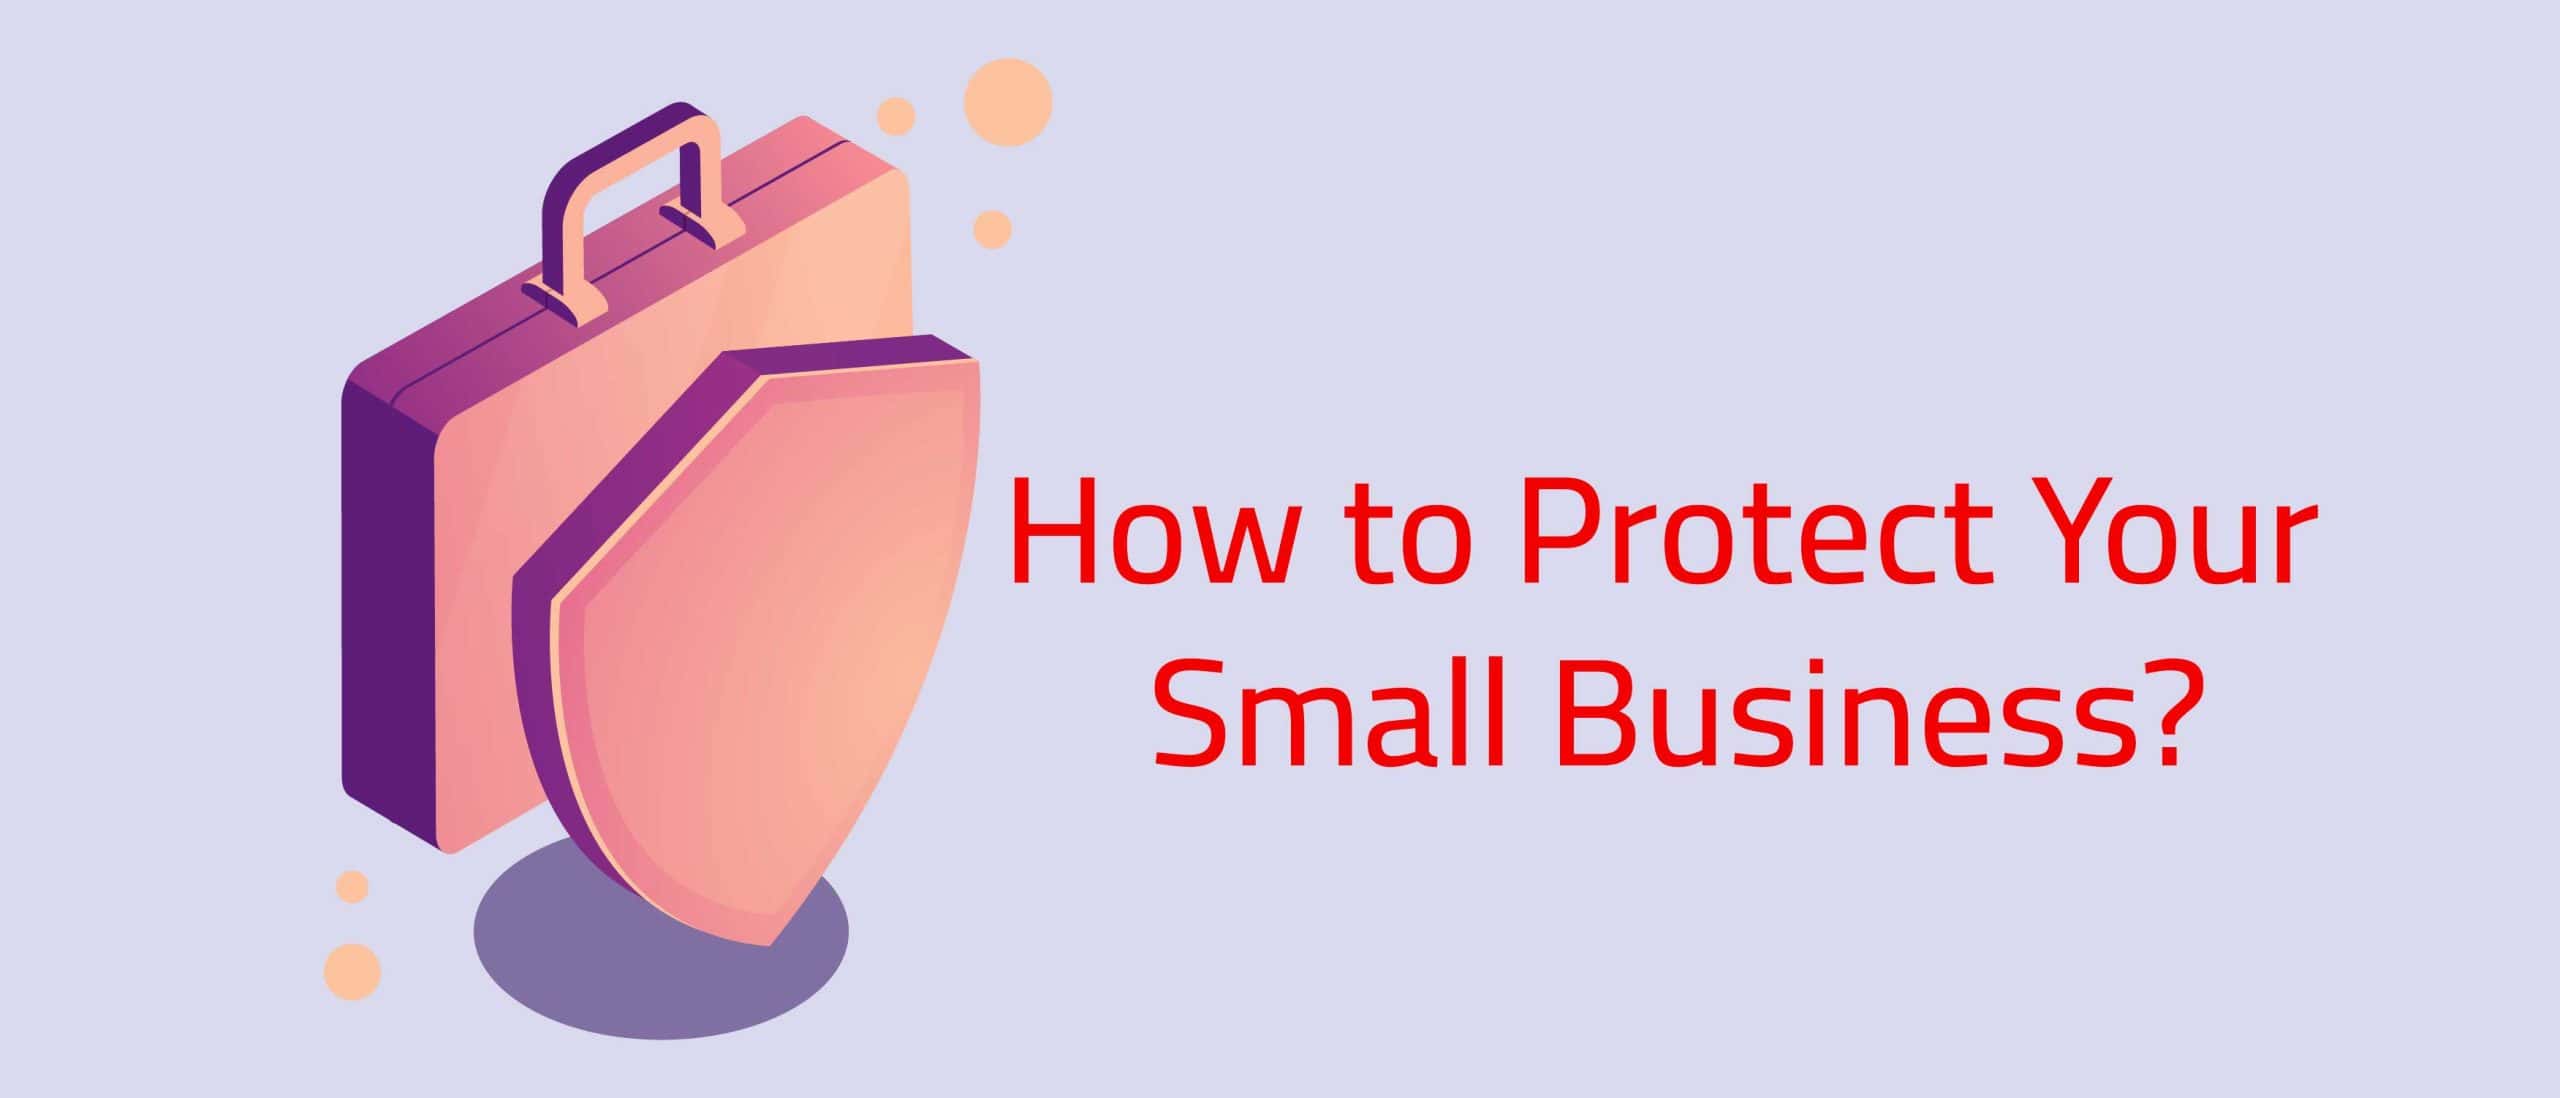 How to Protect Your Small Business